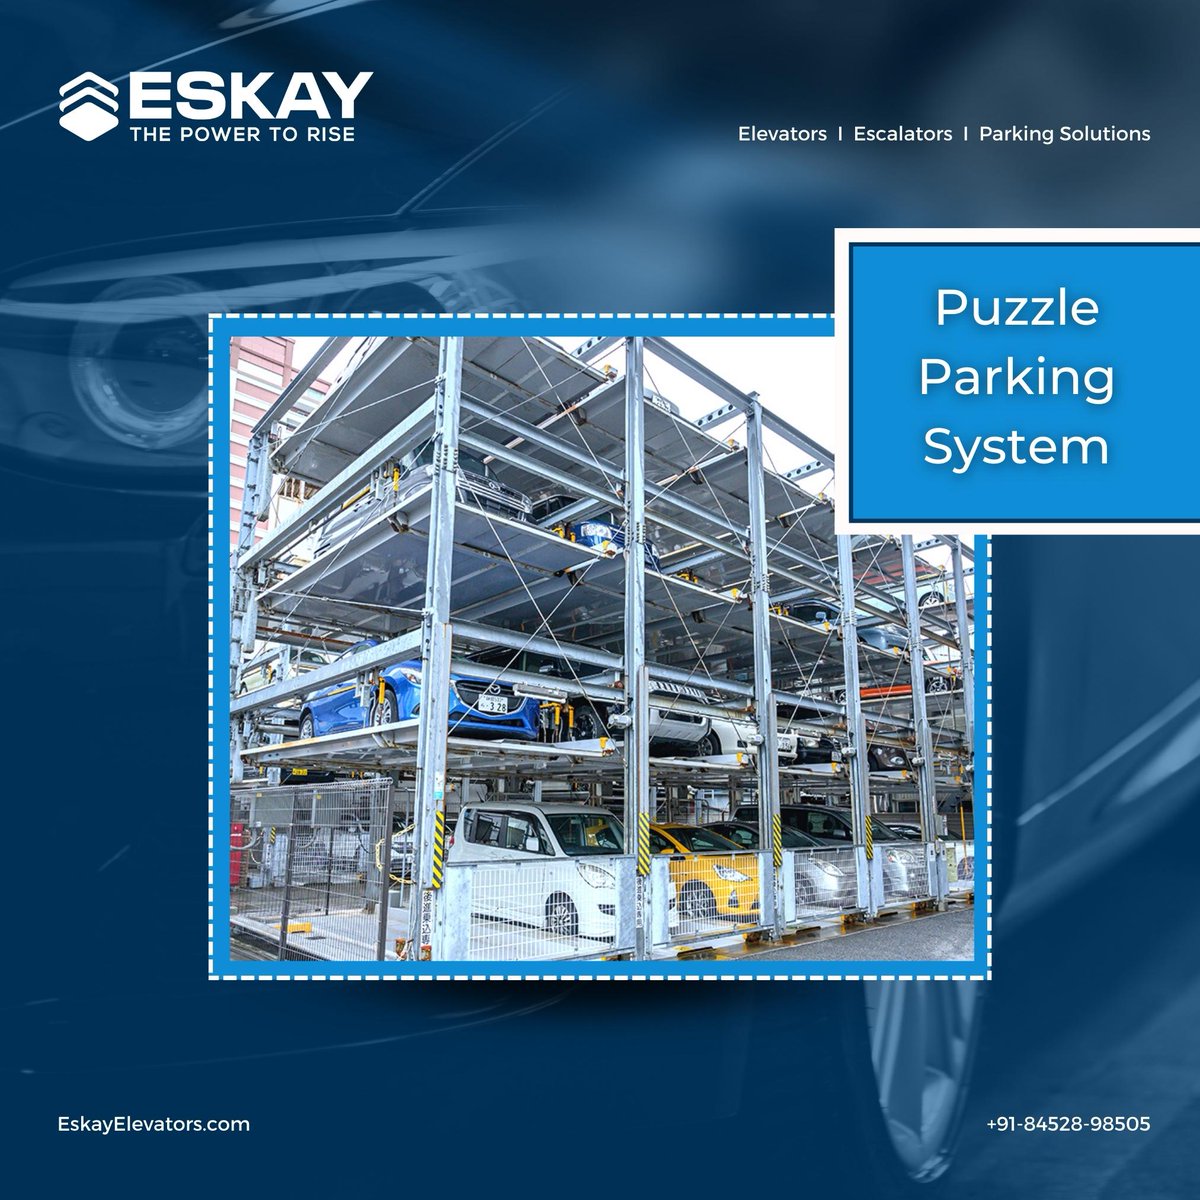 Our fully automated #PuzzleParkingSystem features horizontal & vertical movement of parking spots and can retrieve cars in no time. Plus, with multiple sensors and complete customization options, it's perfect for any property.  #AutomatedParking #EfficientParking #eskayelevators